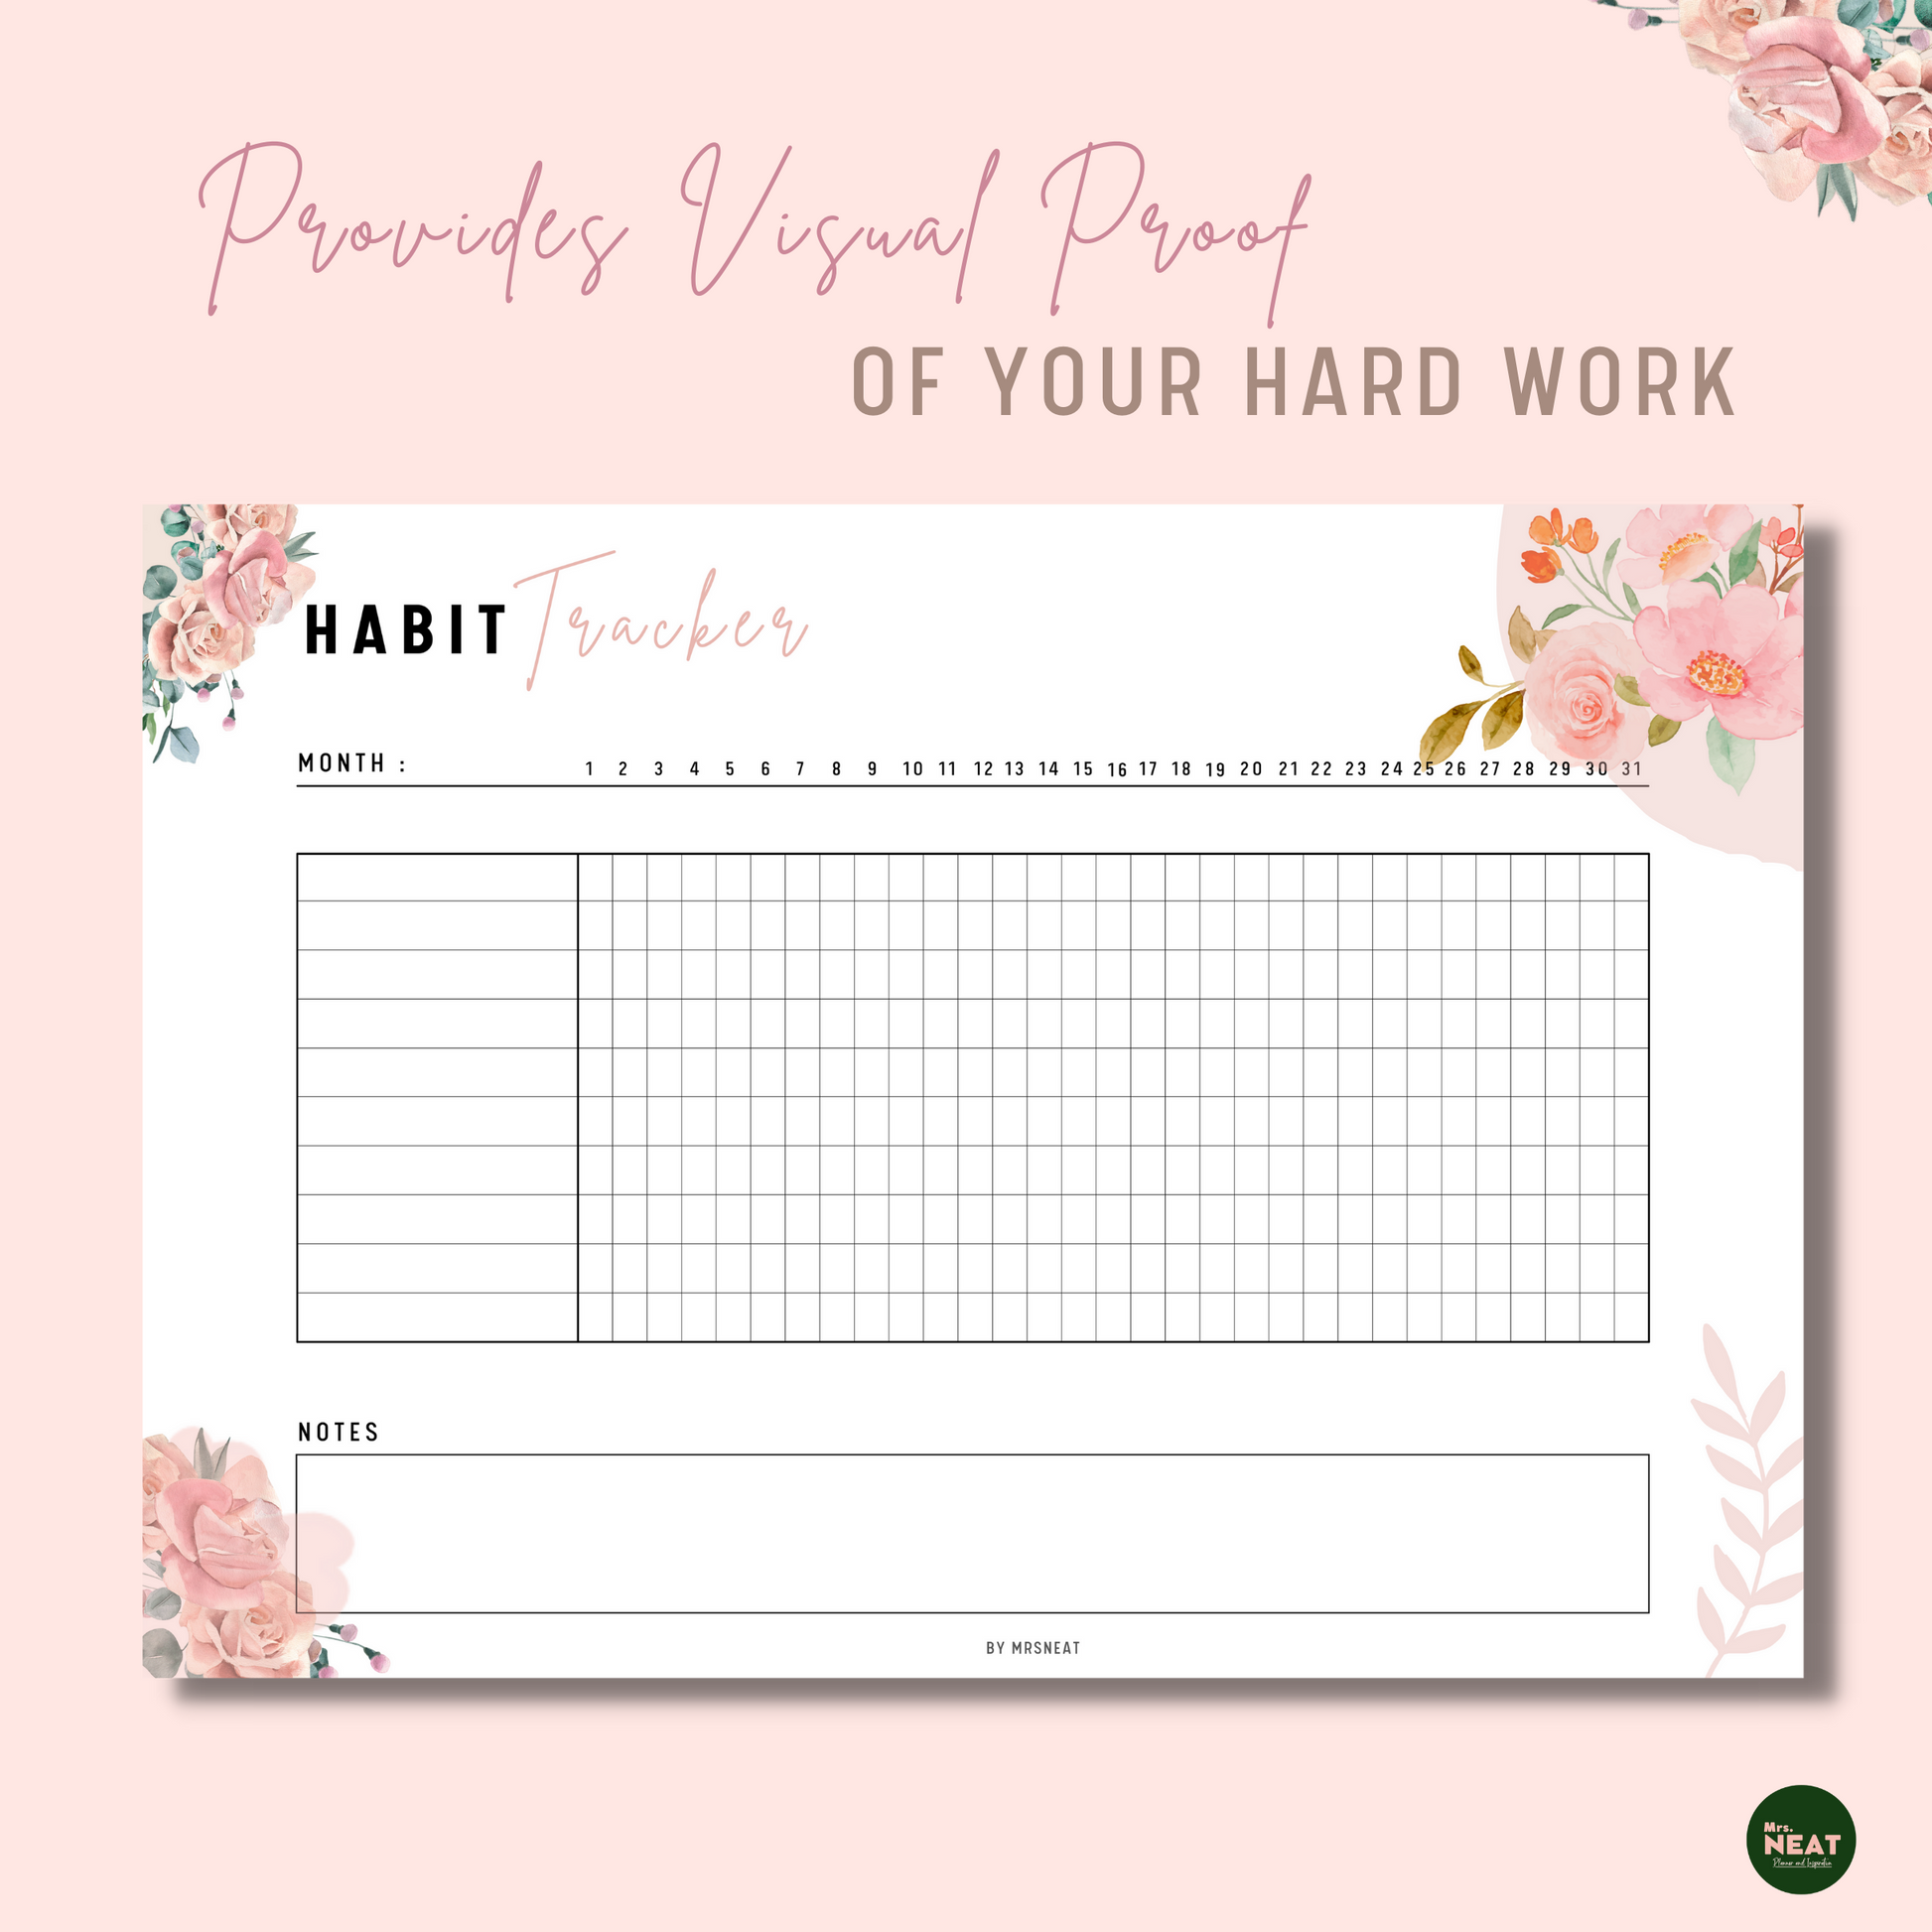 Beautiful and cute pink floral monthly habit tracker as a visual proof of the hard work